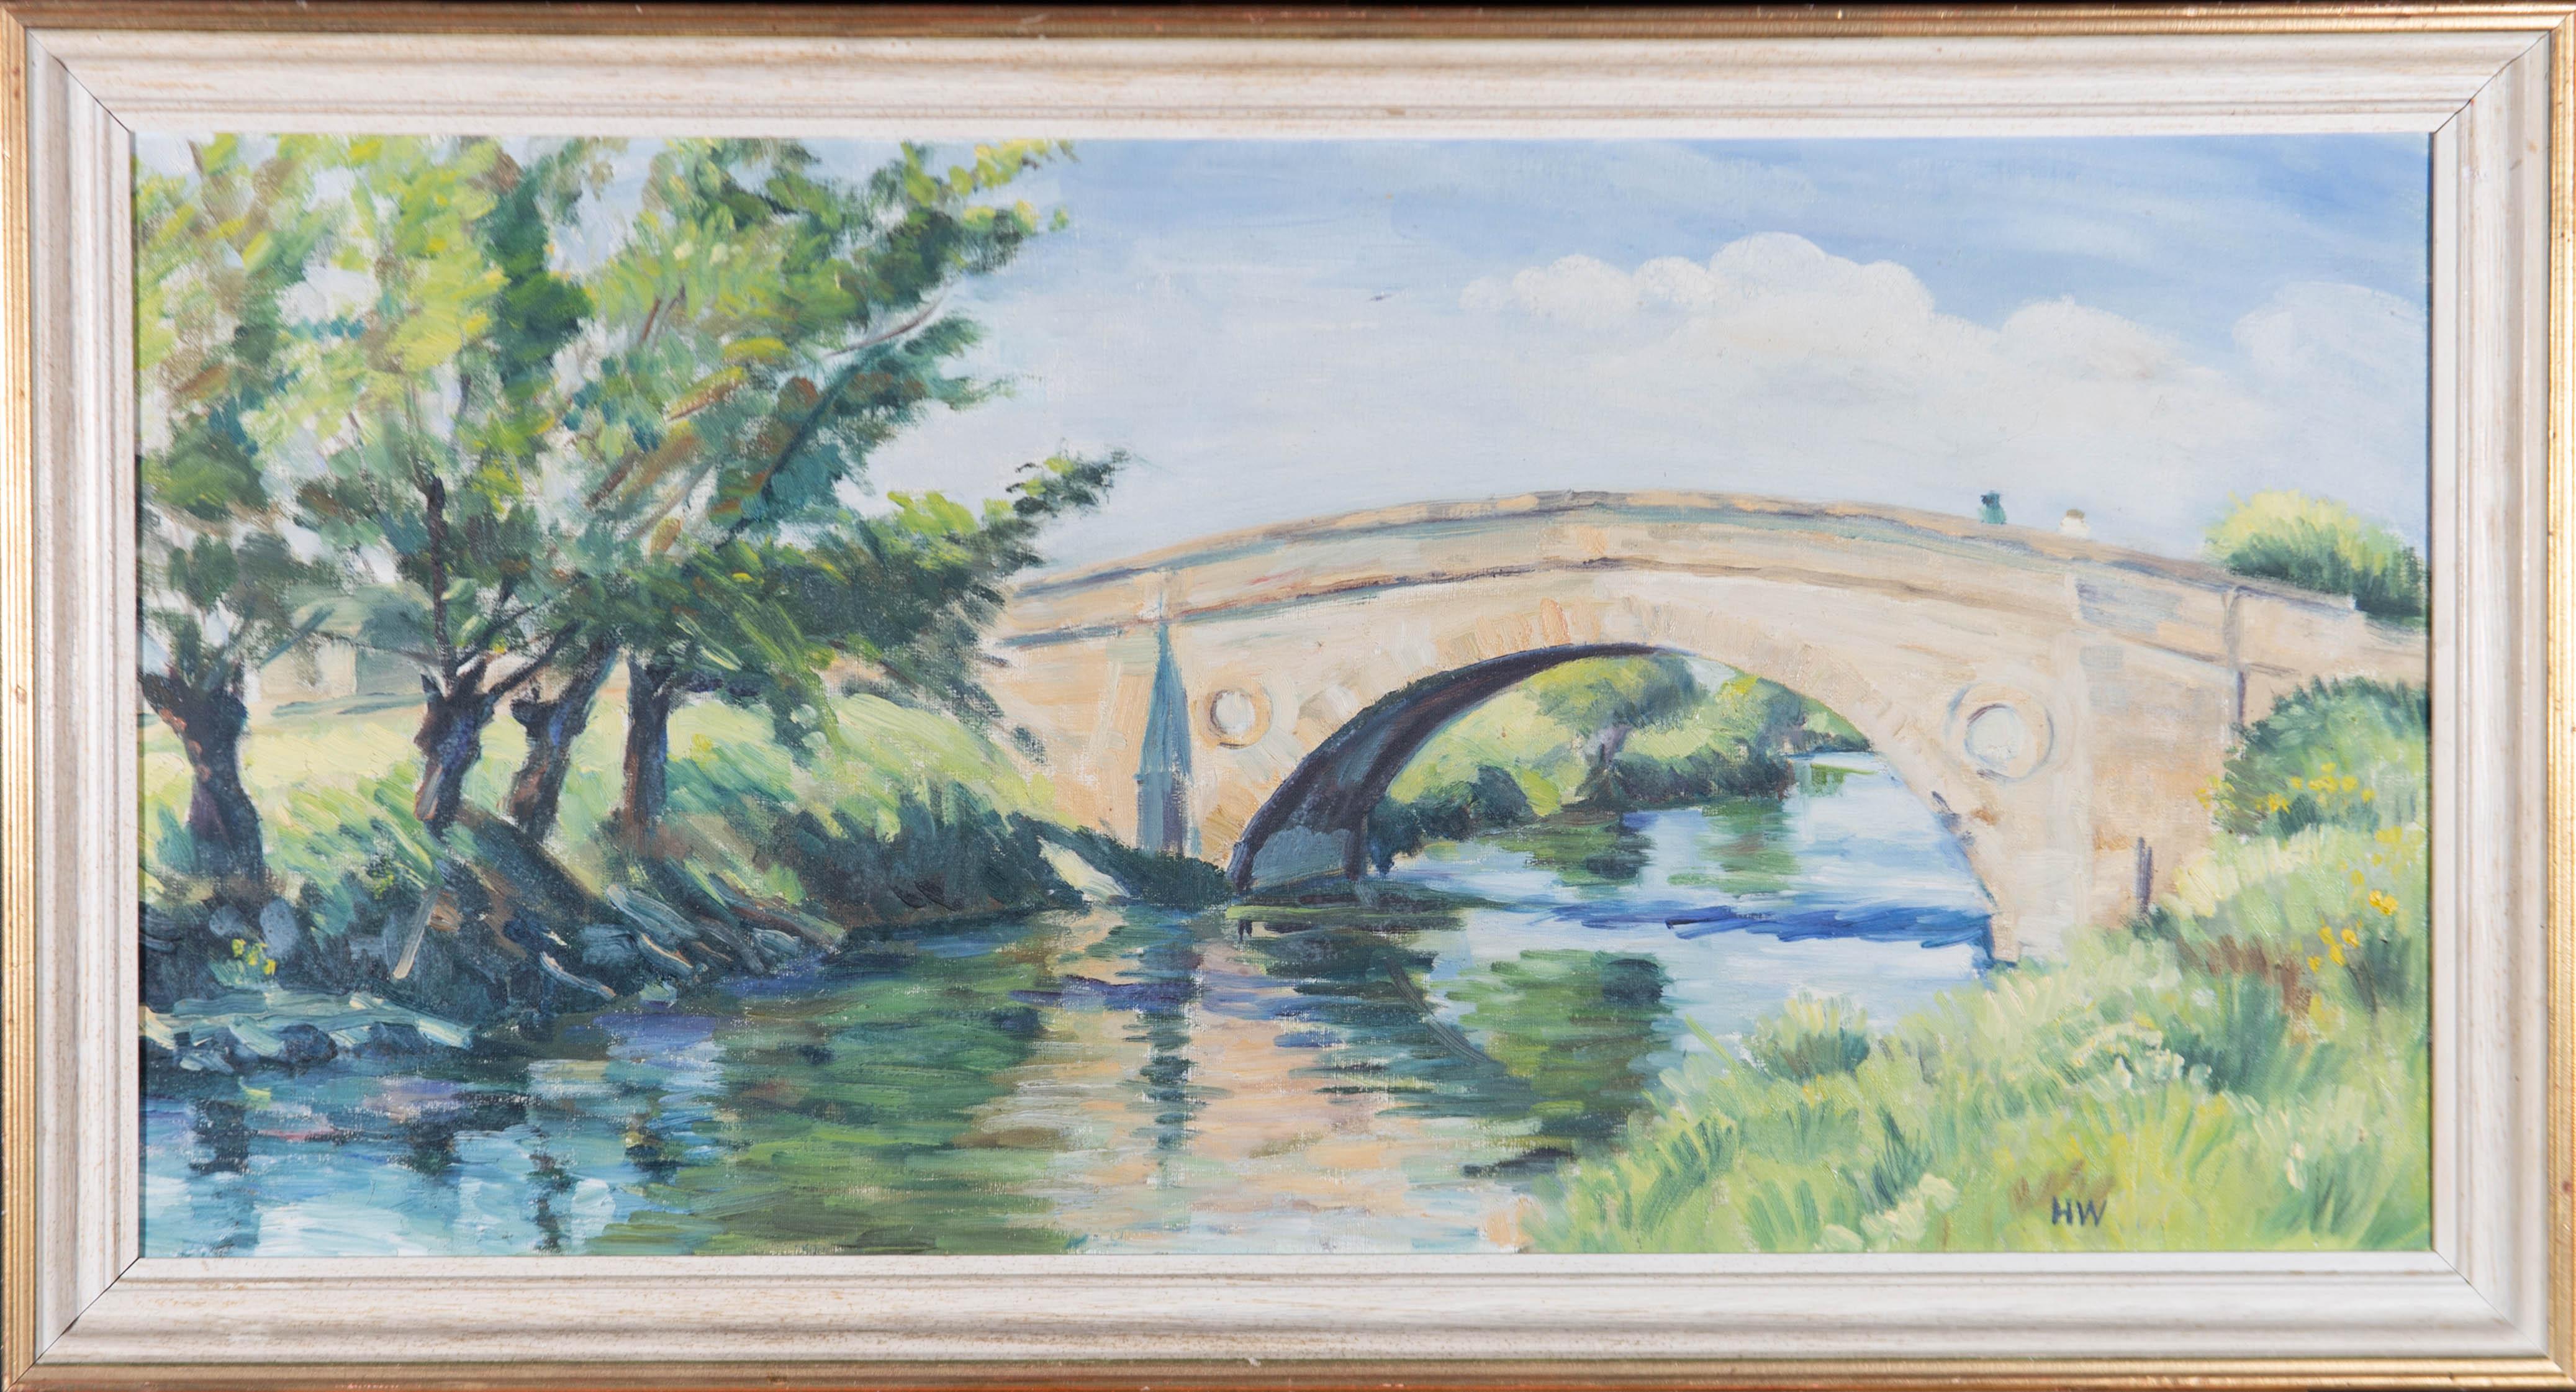 An impressionistic landscape depicting Tadpole Bridge near Faringdon in the Cotswolds crossing the River Thames. Presented in a white painted wooden frame with a gilt-effect outer edge. Initialled to the lower-right edge. Artist's label inscribed